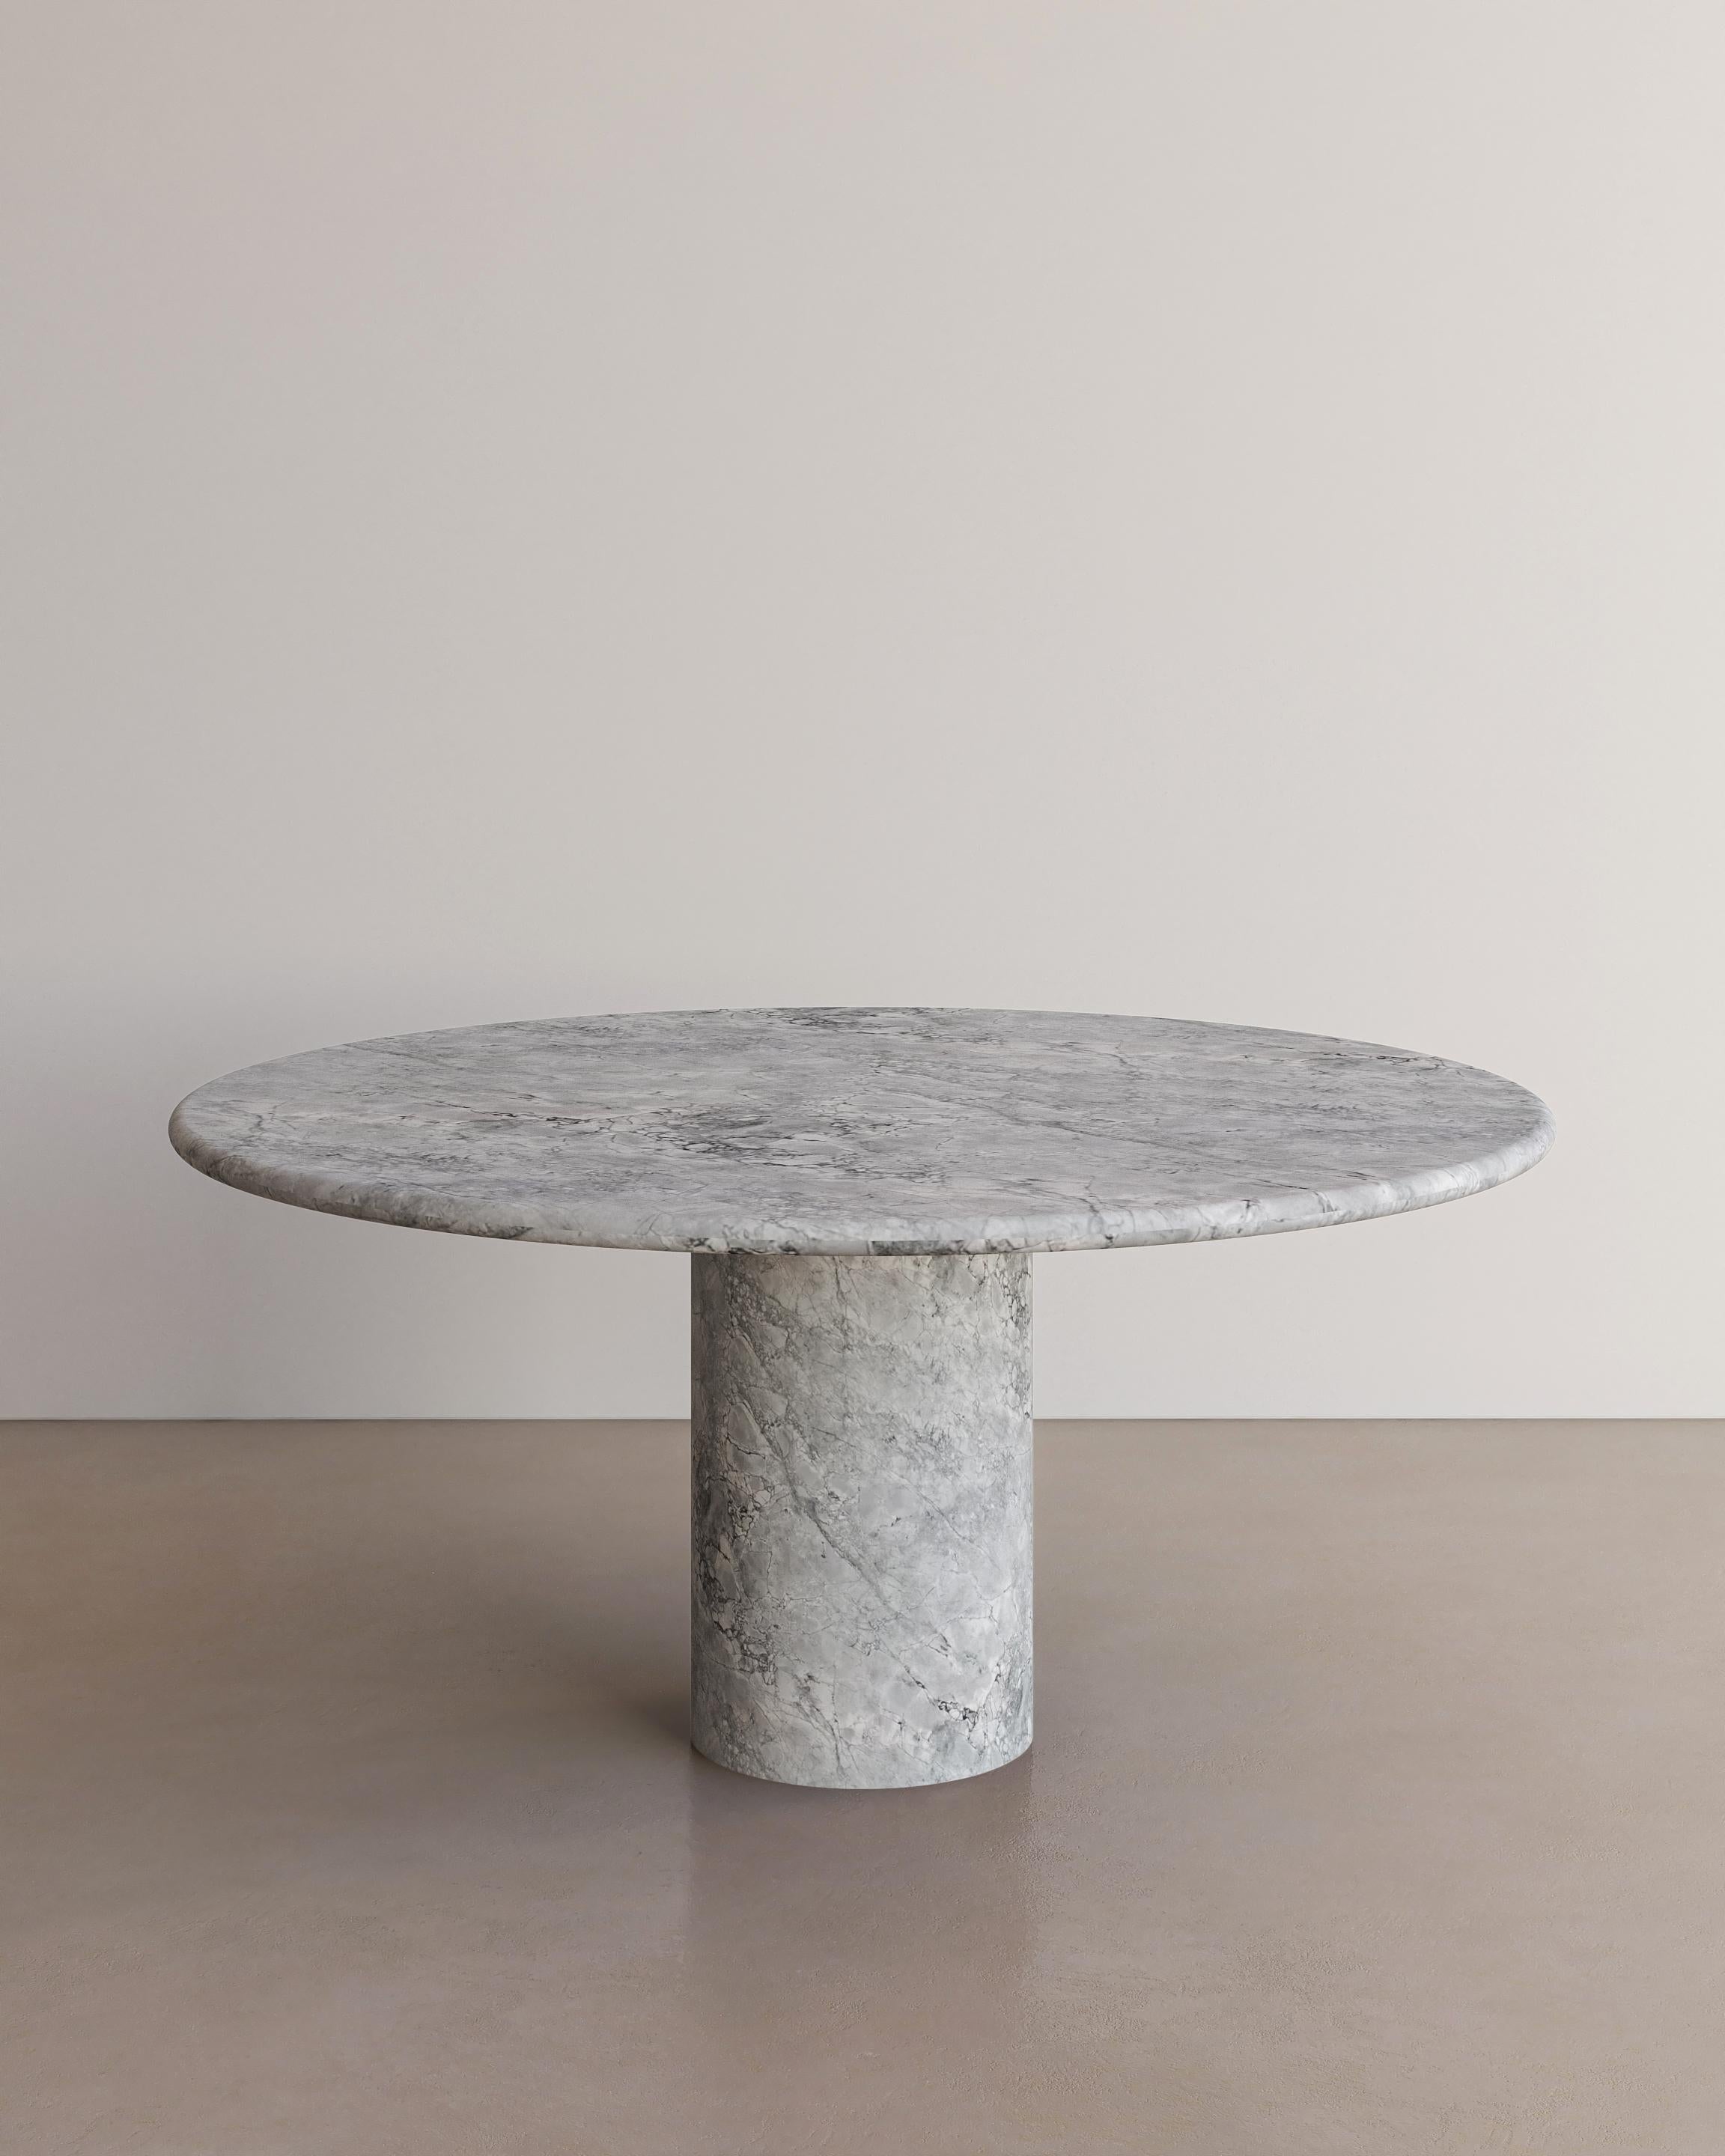 Contemporary Esmeralda Quartzite Voyage Dining Table i by the Essentialist For Sale